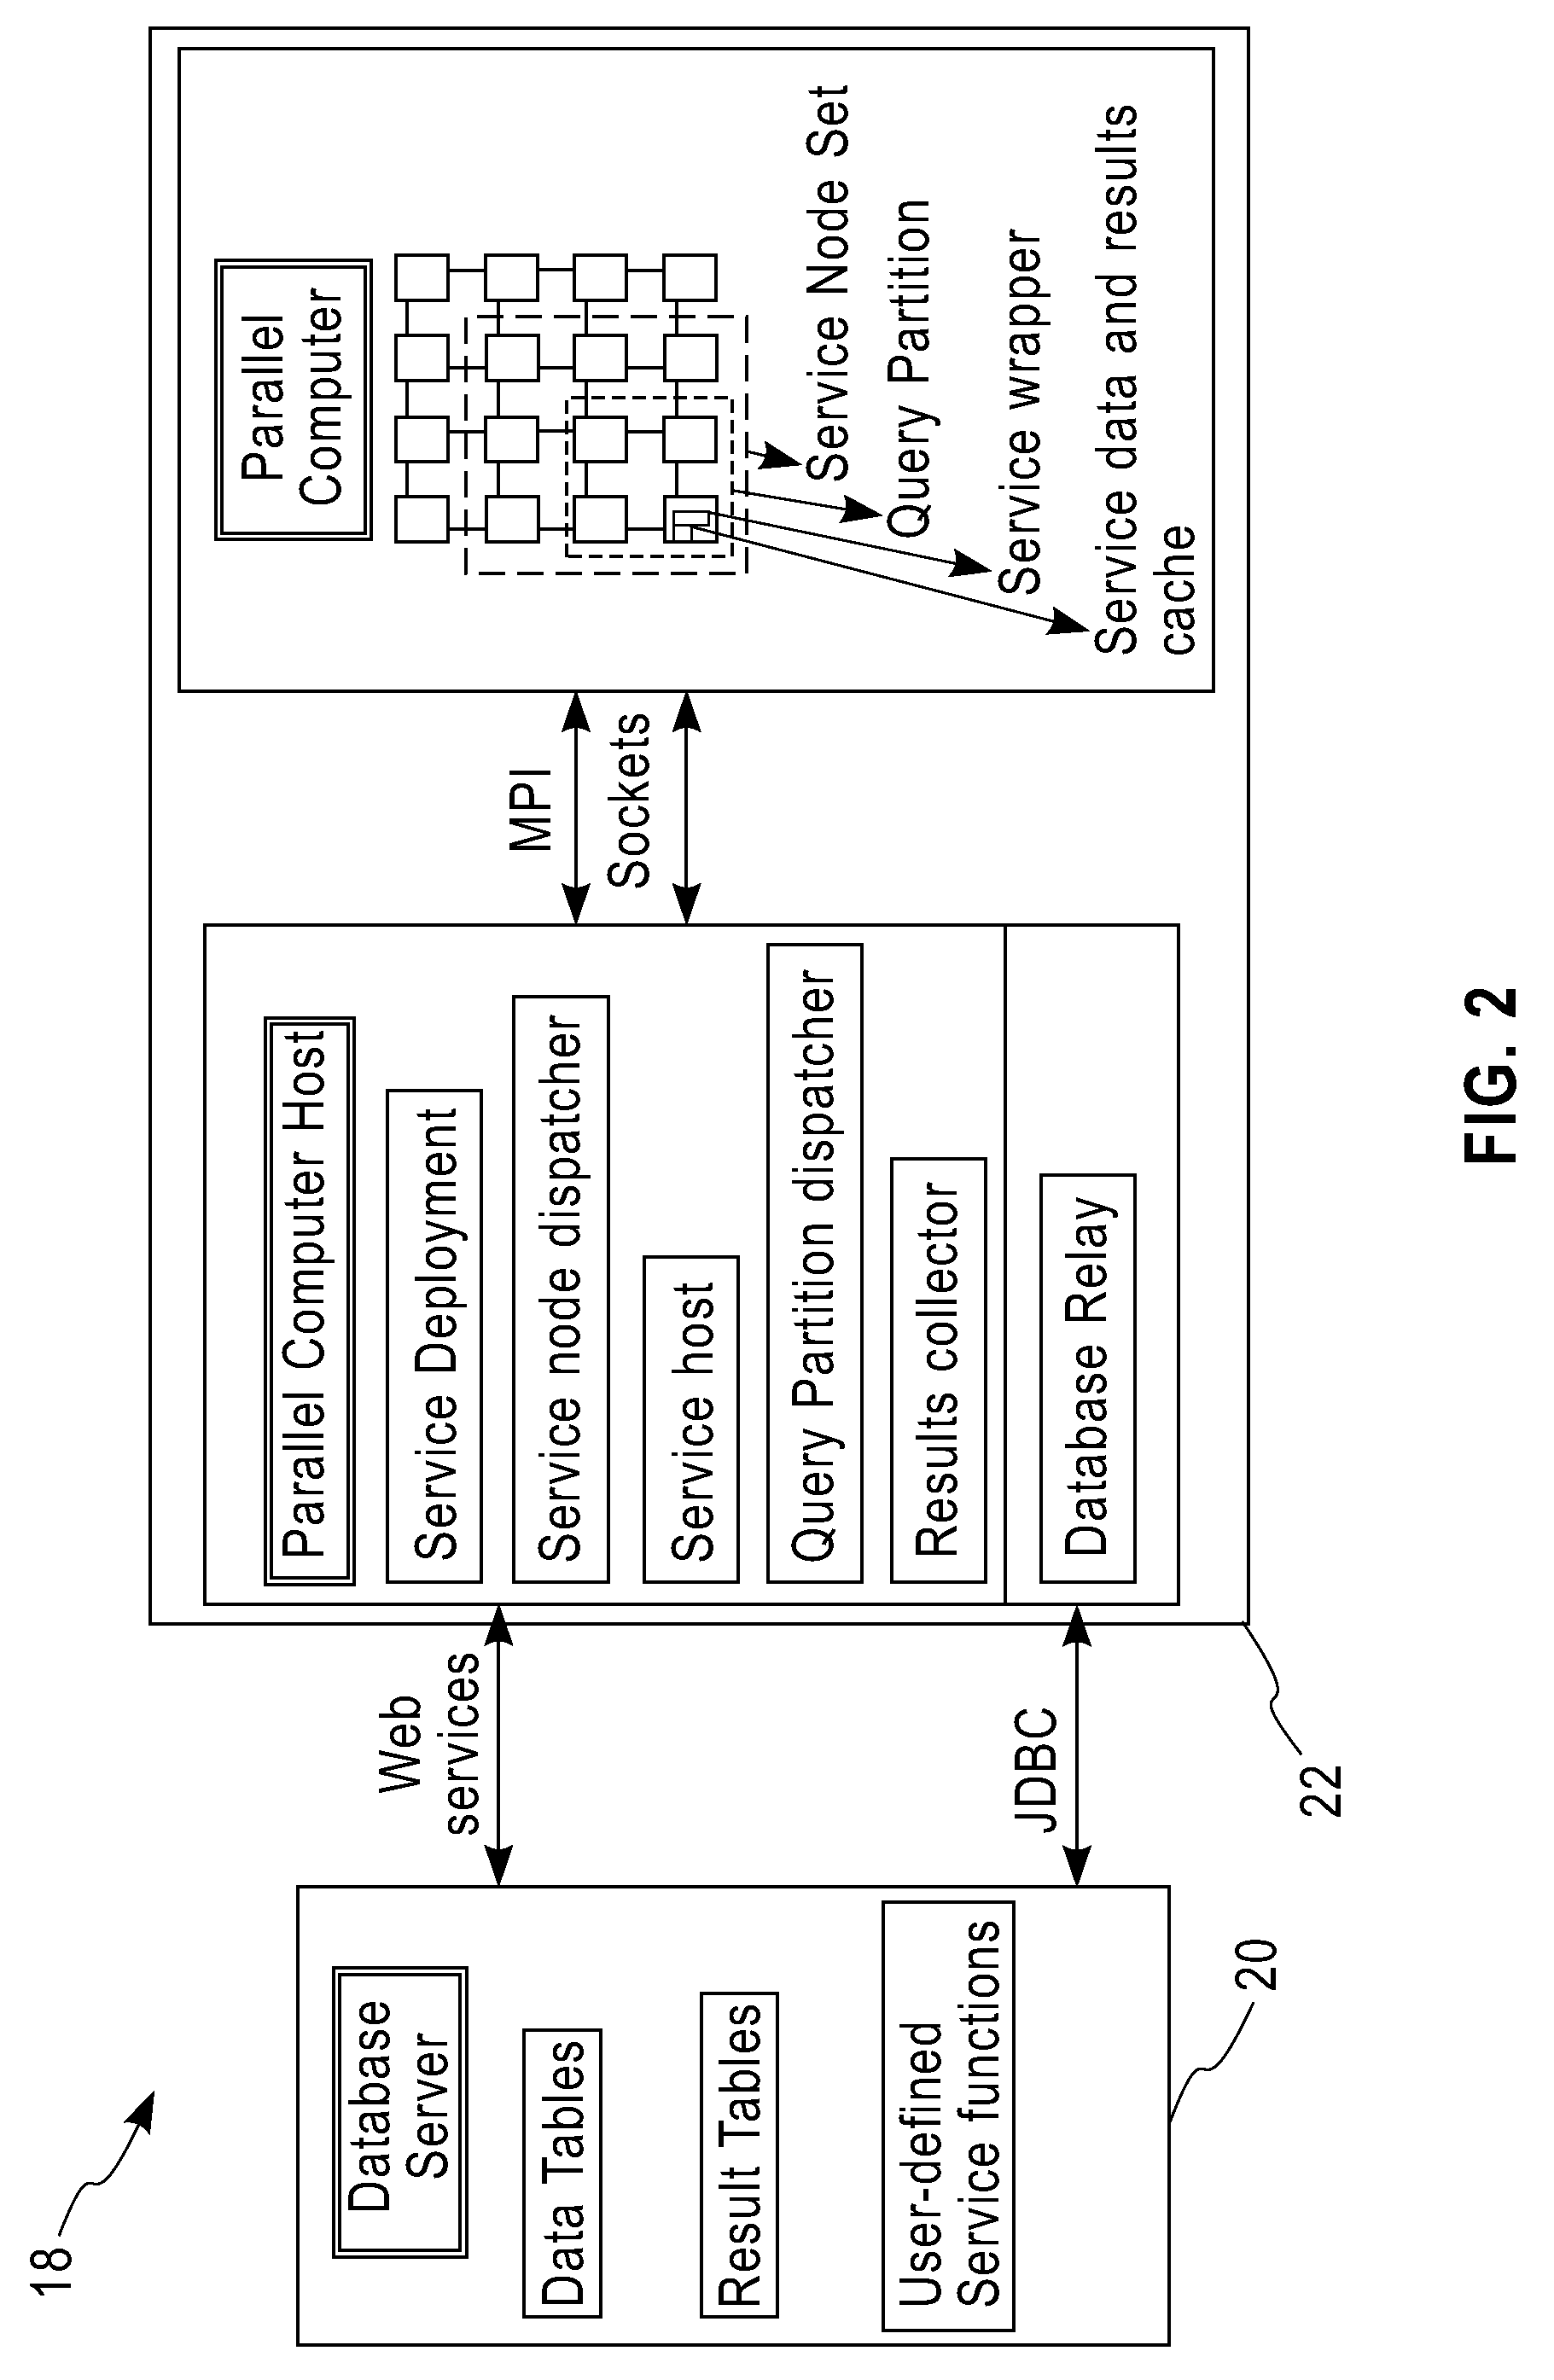 System and method for executing compute-intensive database user-defined programs on an attached high-performance parallel computer